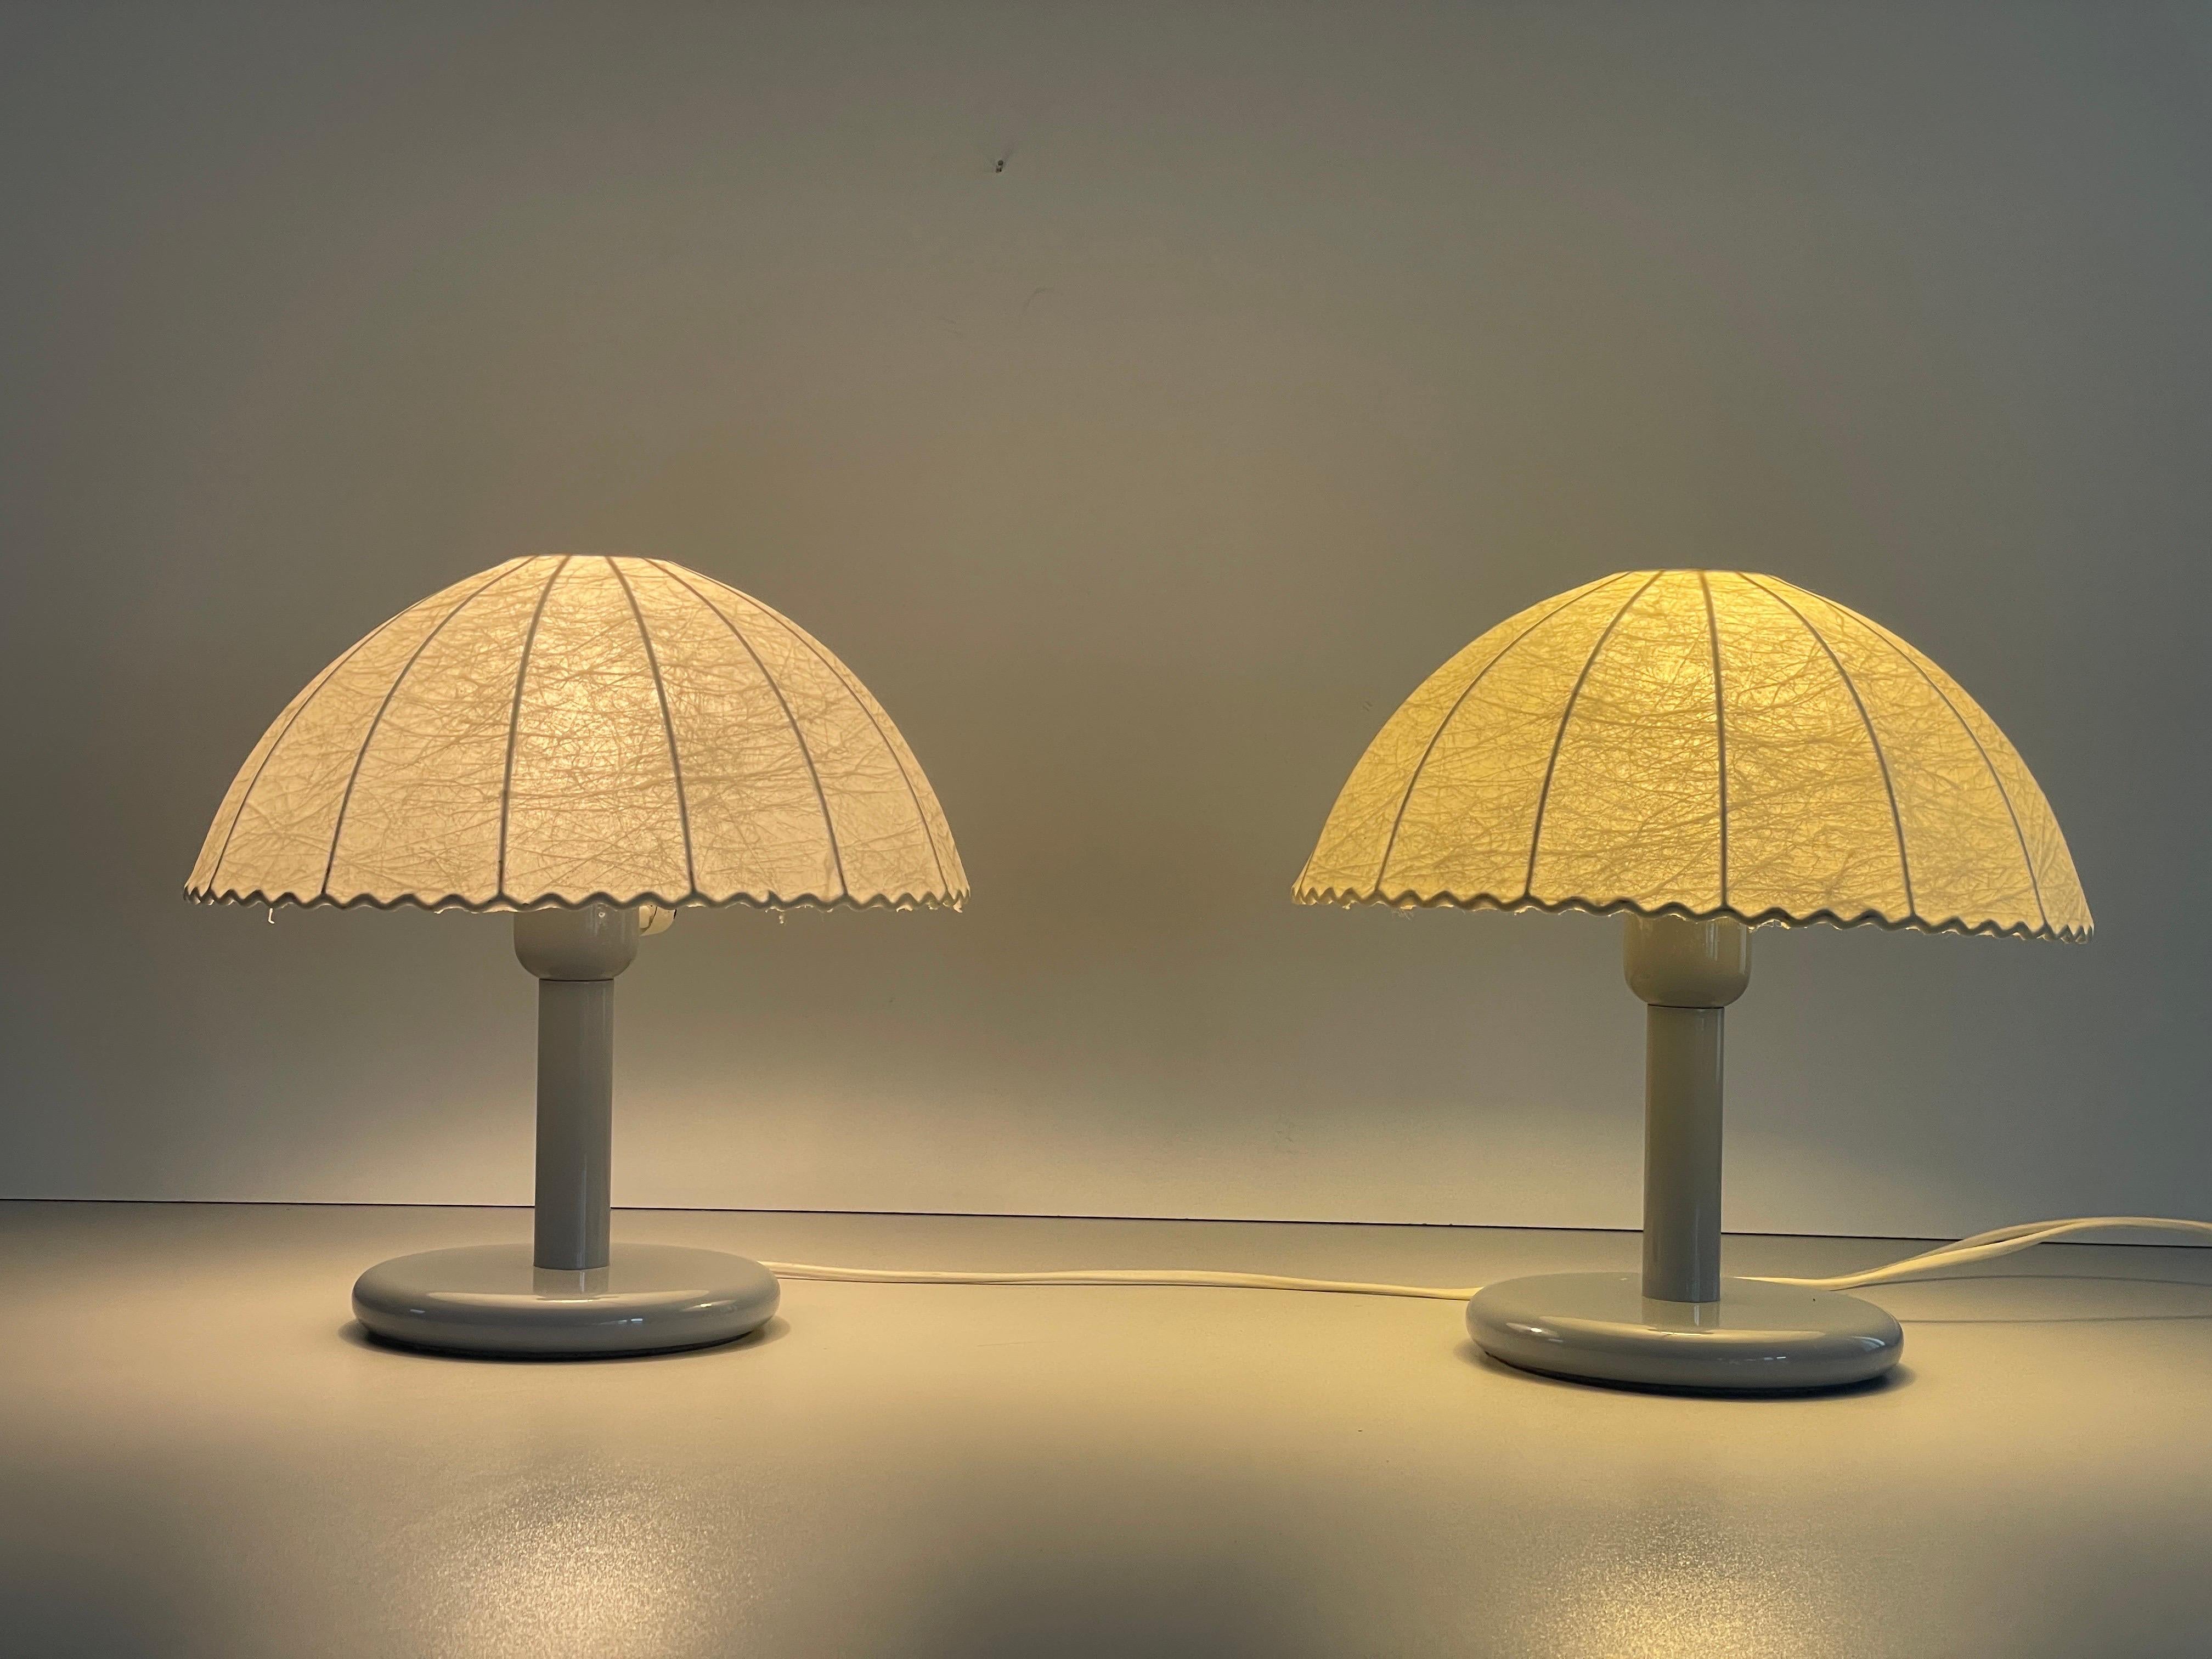 Pair of Cocoon Table Lamps with Grey Metal Base by GOLDKANT, 1960s, Germany For Sale 5